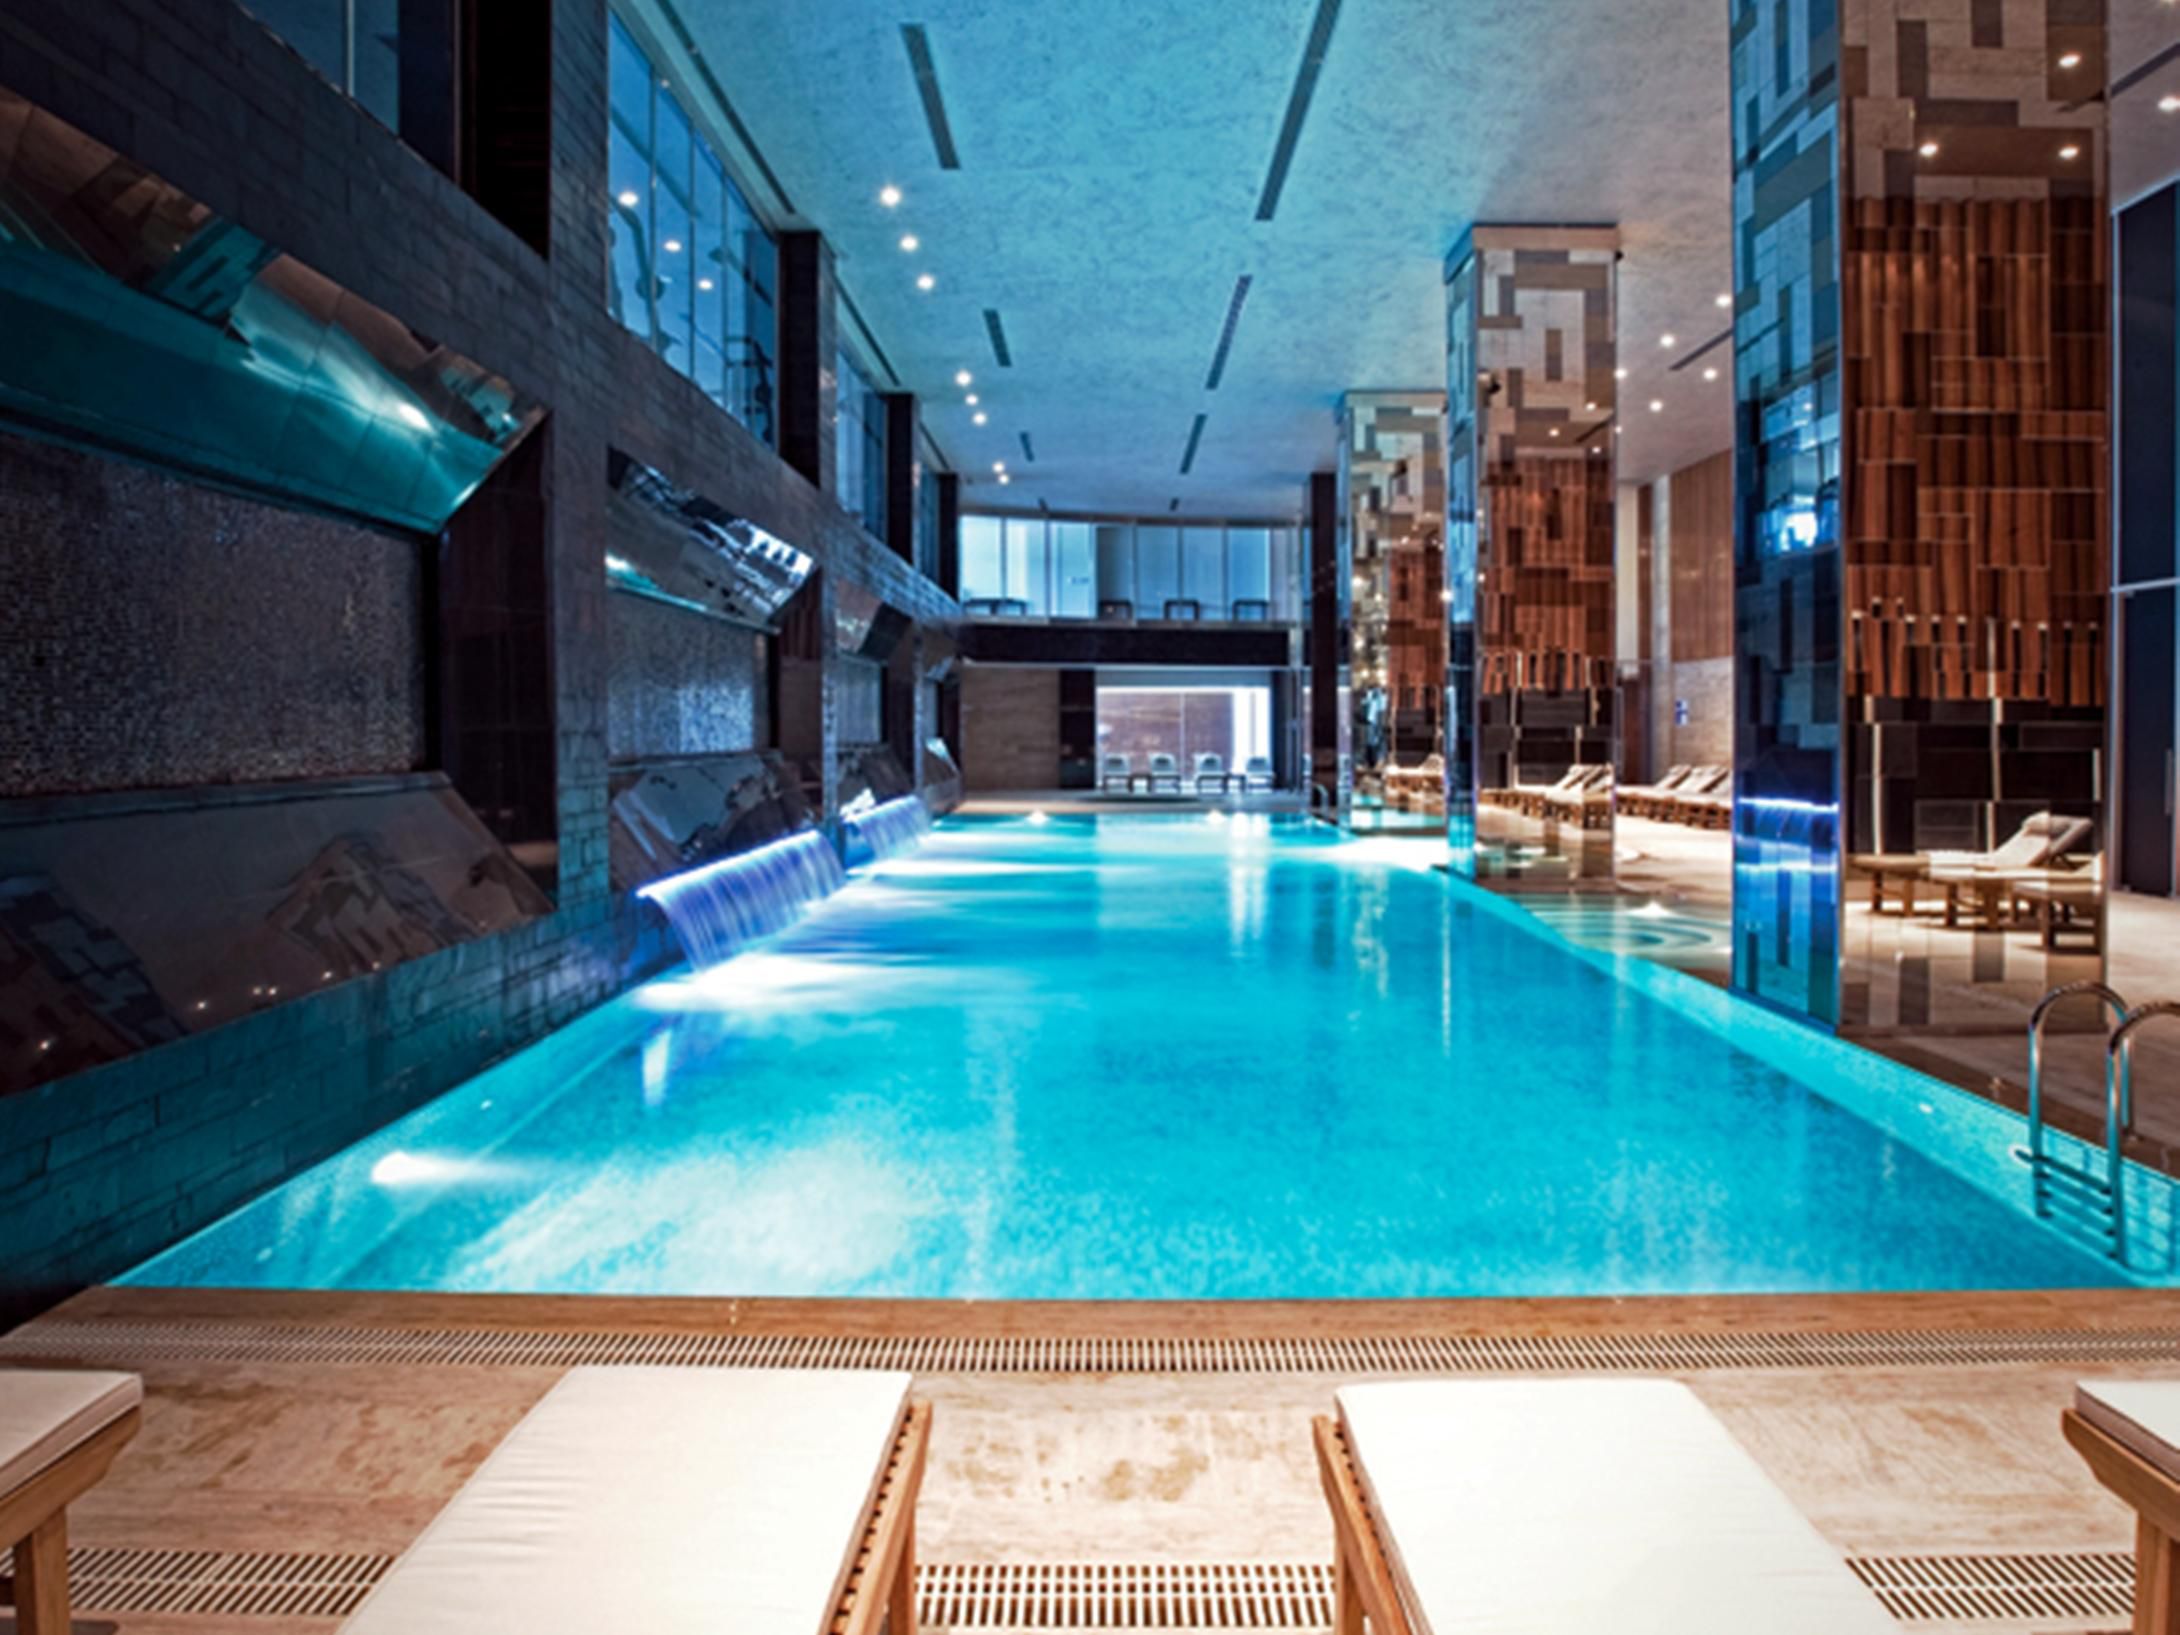 You can indulge yourself with our indoor and outdoor pool, cardio and fitness equipment, aerobics, Turkish Hamam, Steam Room and Sauna, Massage Rooms, Jacuzzi and rainroom in 3500 sqm area. 
Spa Treatments include Paraffin Hand Treatment and Foot Reflexology.